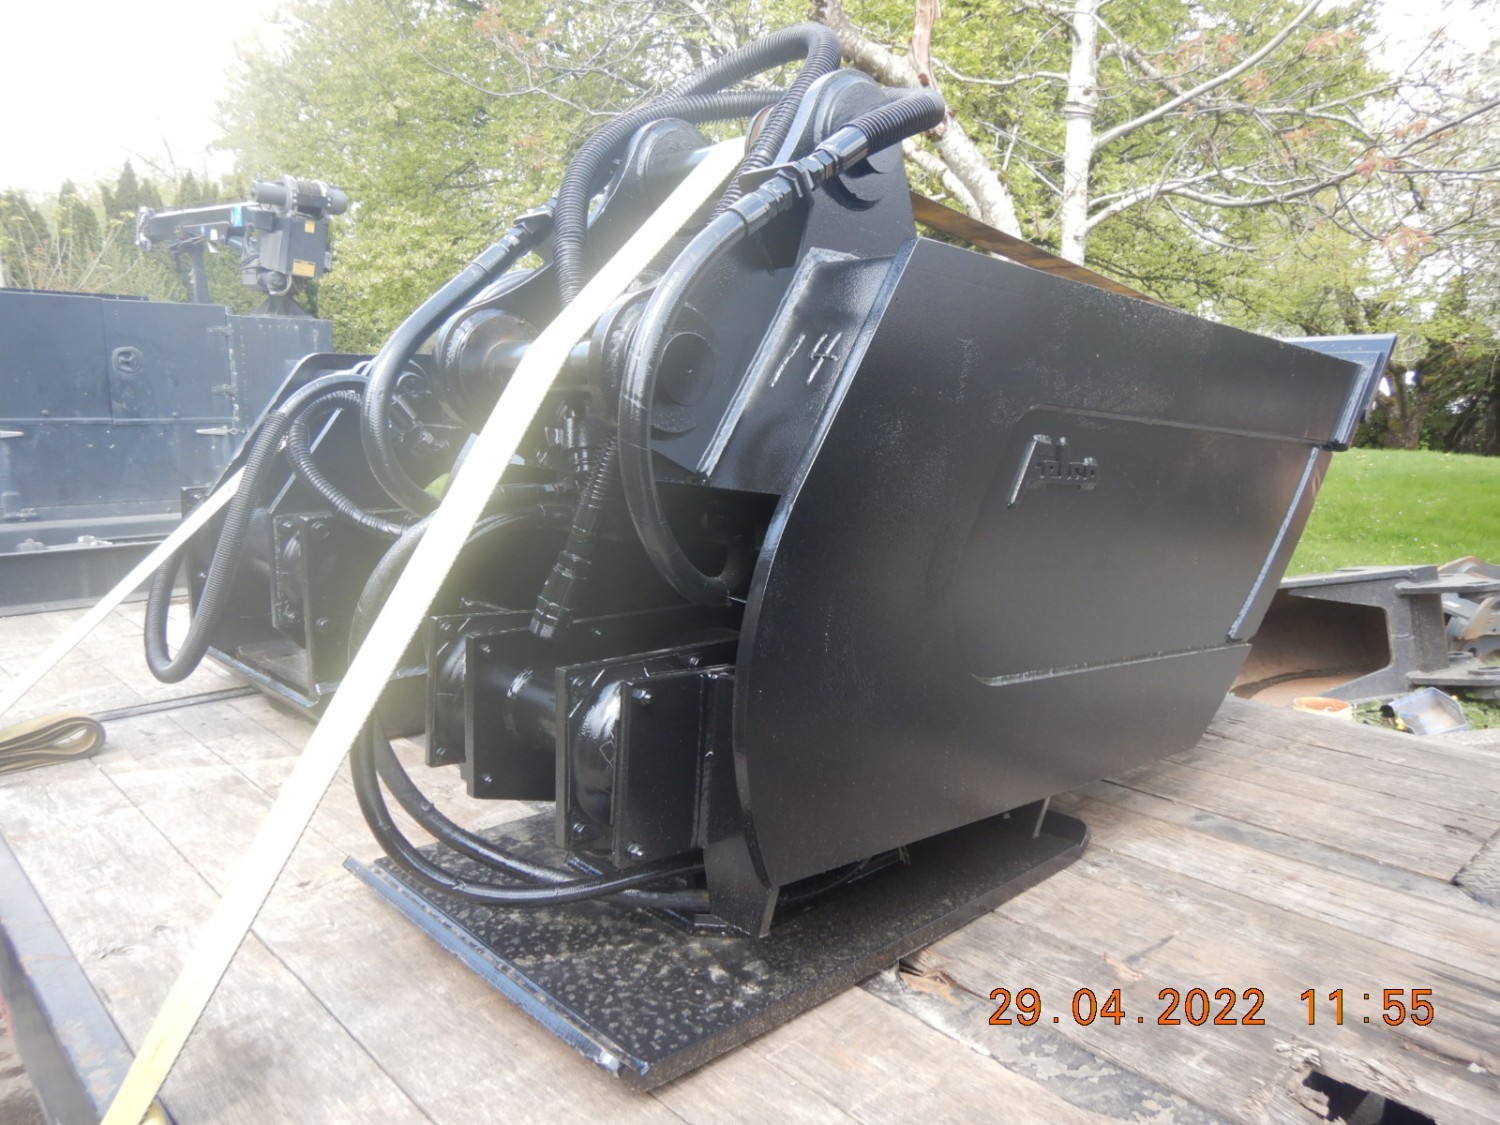 felco-200-350-class-excavator-vibratory-hydraulic-plate-compaction-buckets-as-new-ready-to-work-big-14